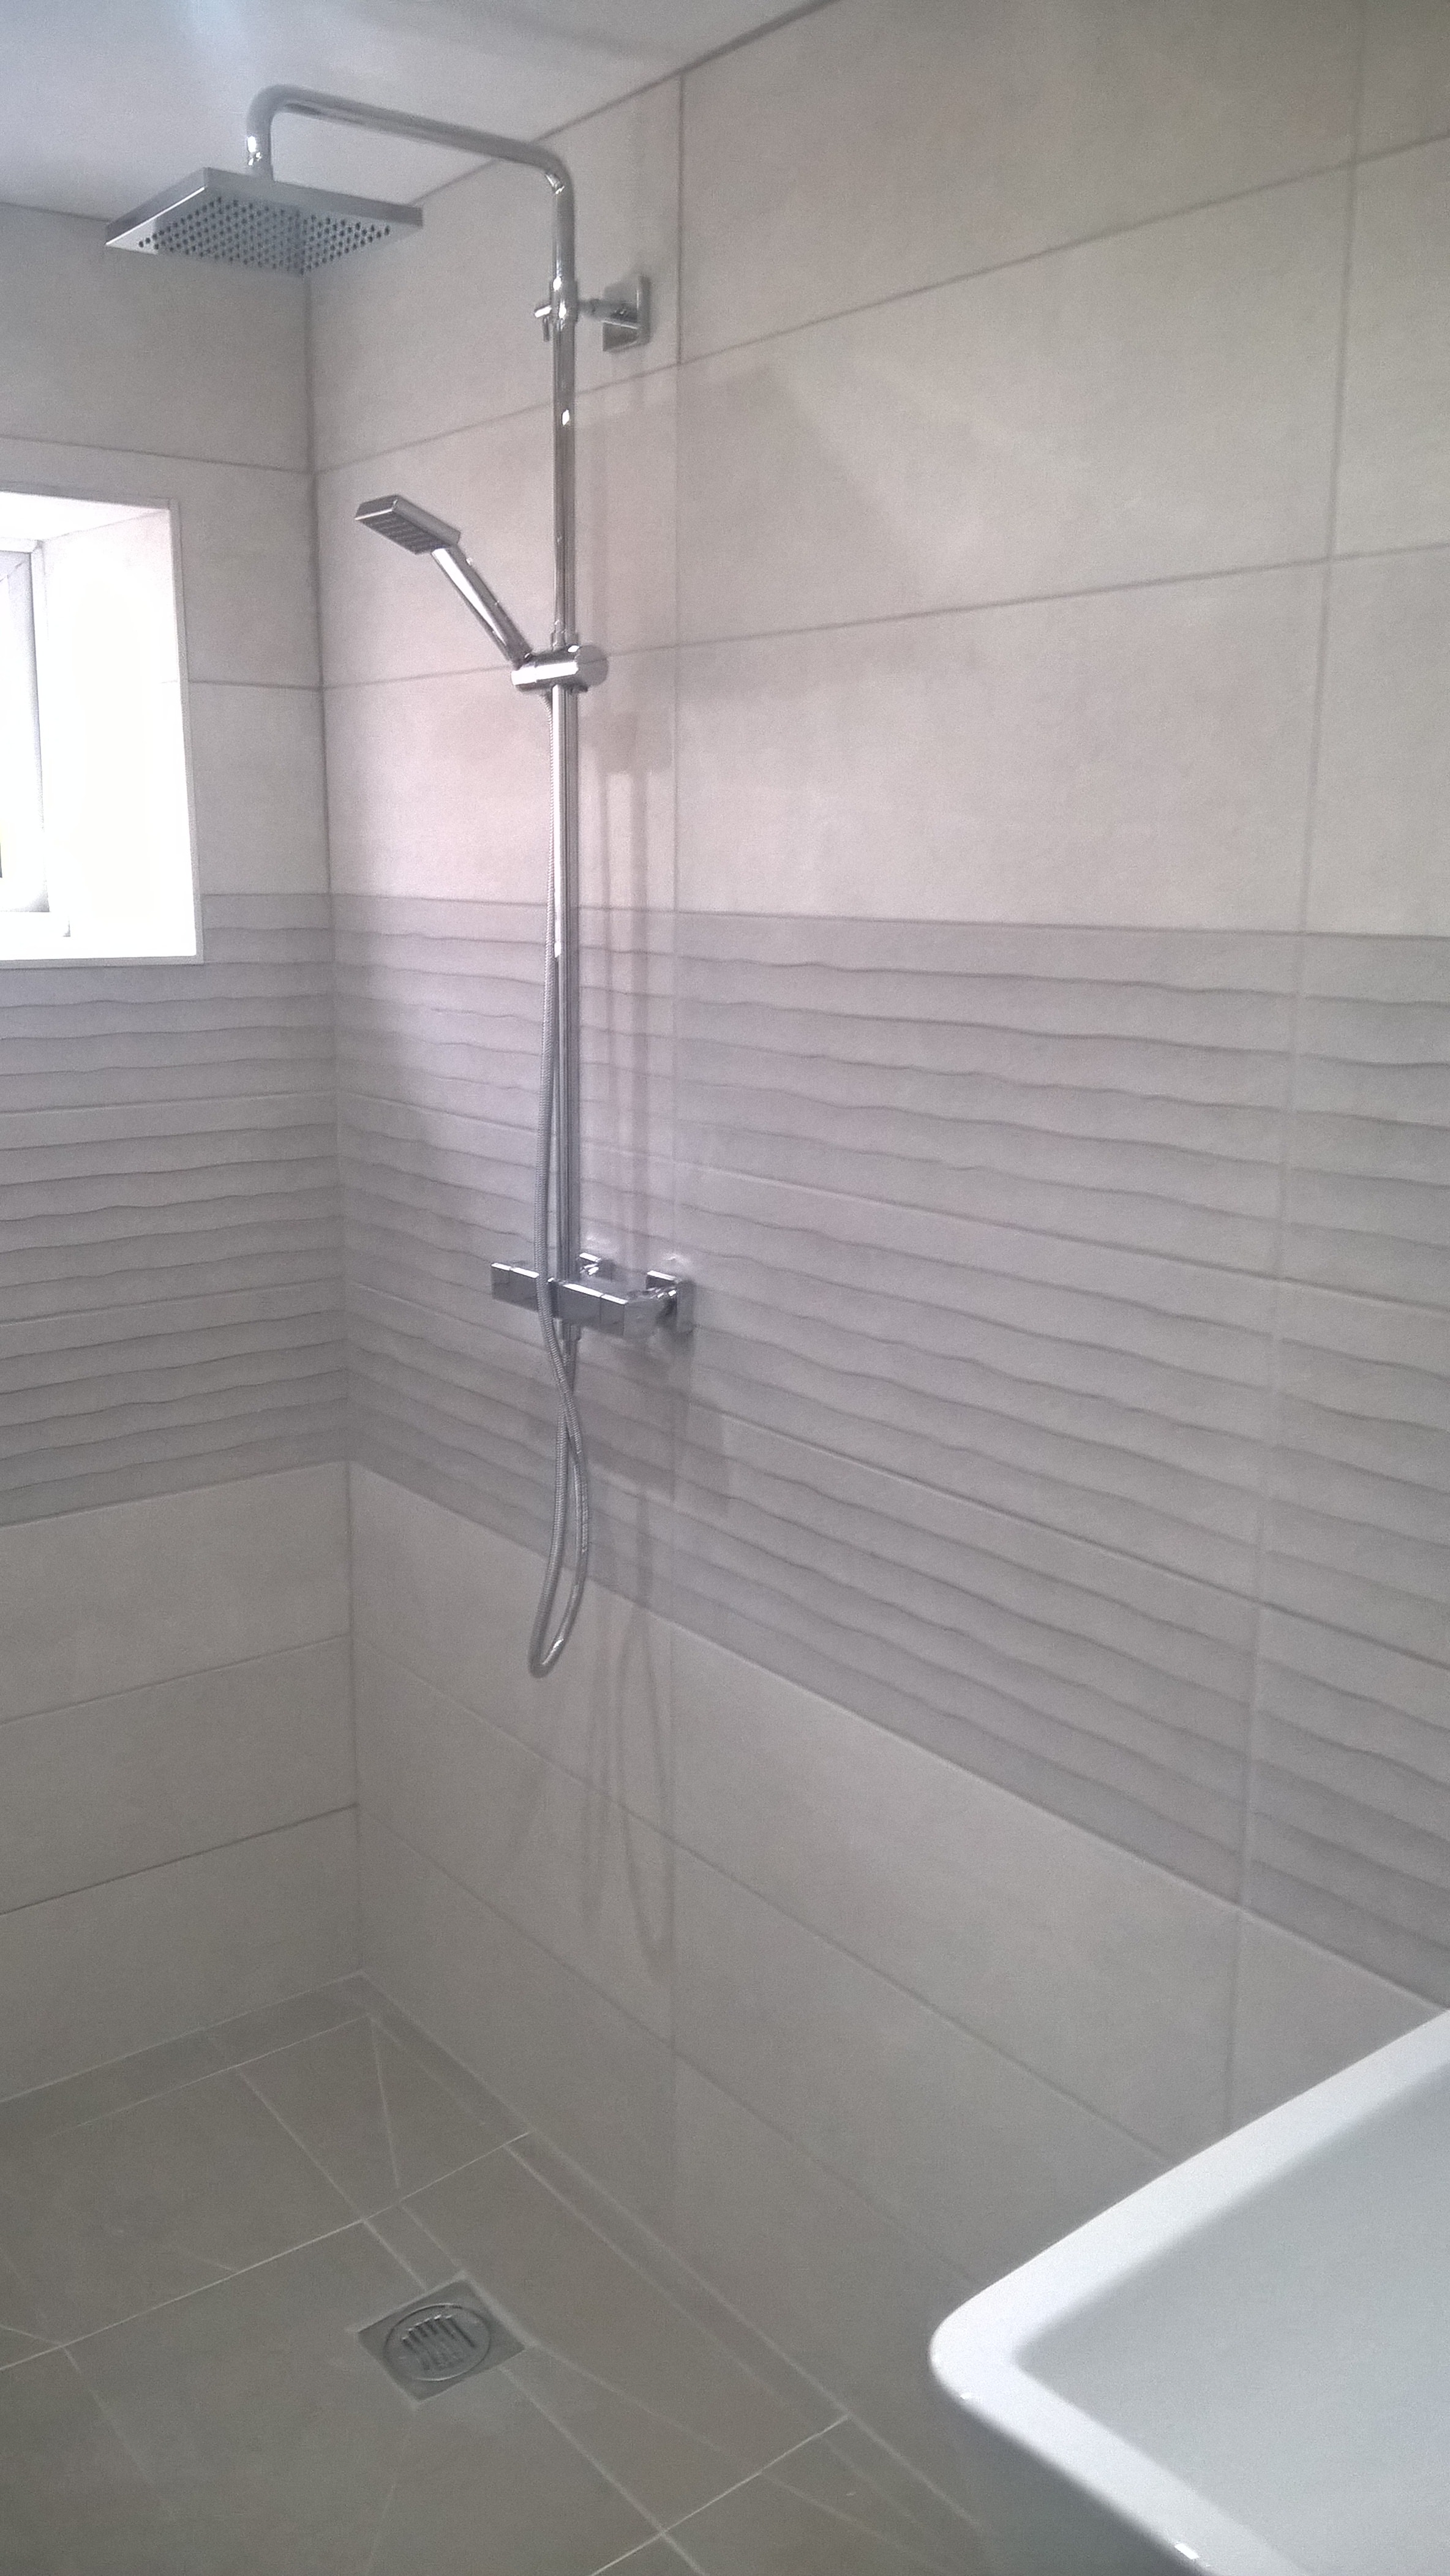 Newly built wetroom with a walk in shower